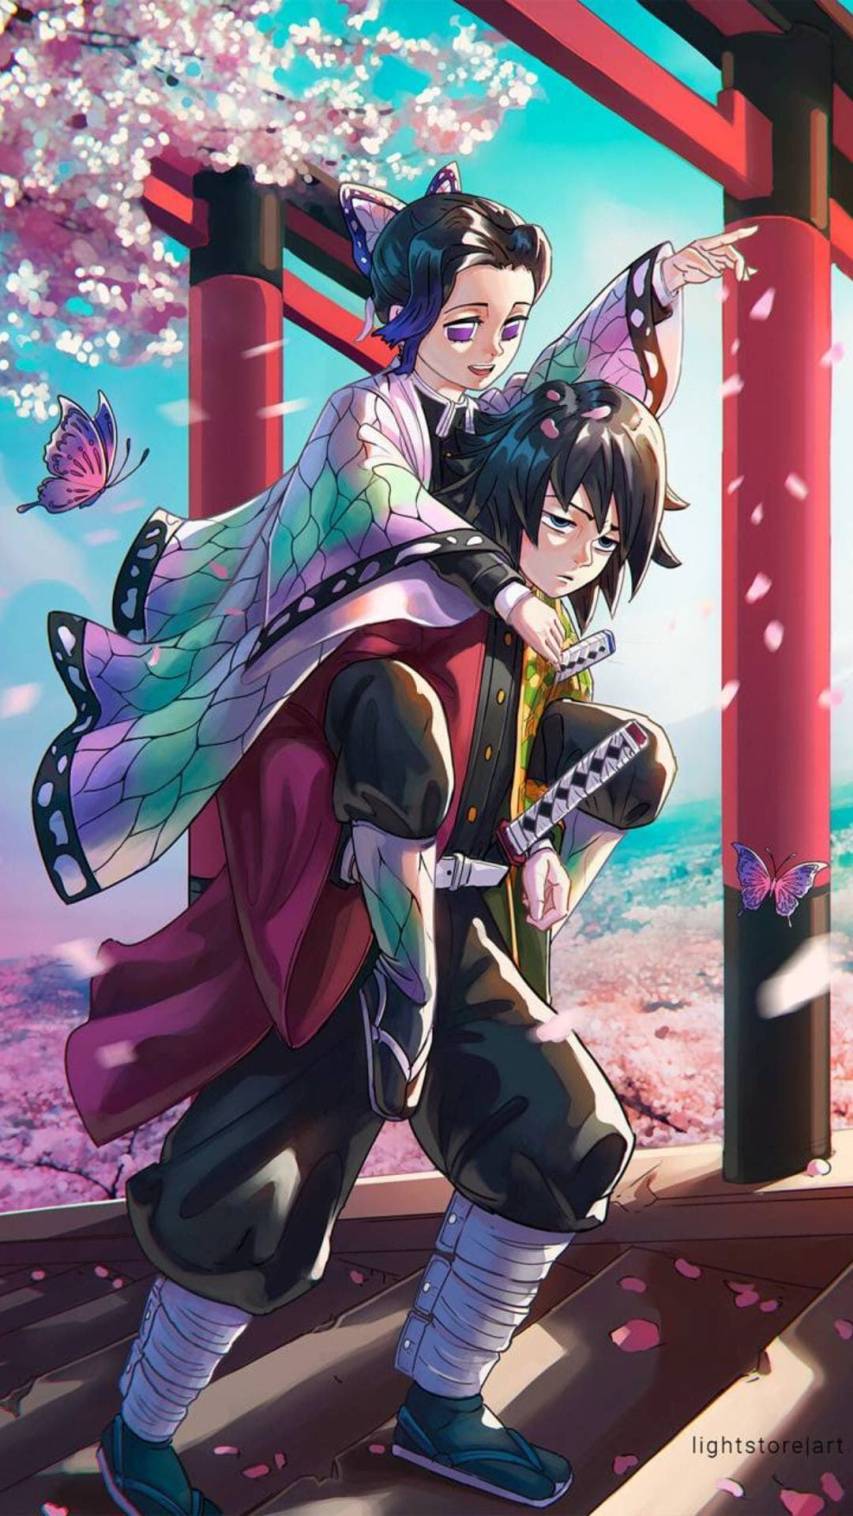 Anime girl with sword and boyfriend in traditional japanese clothing - Demon Slayer